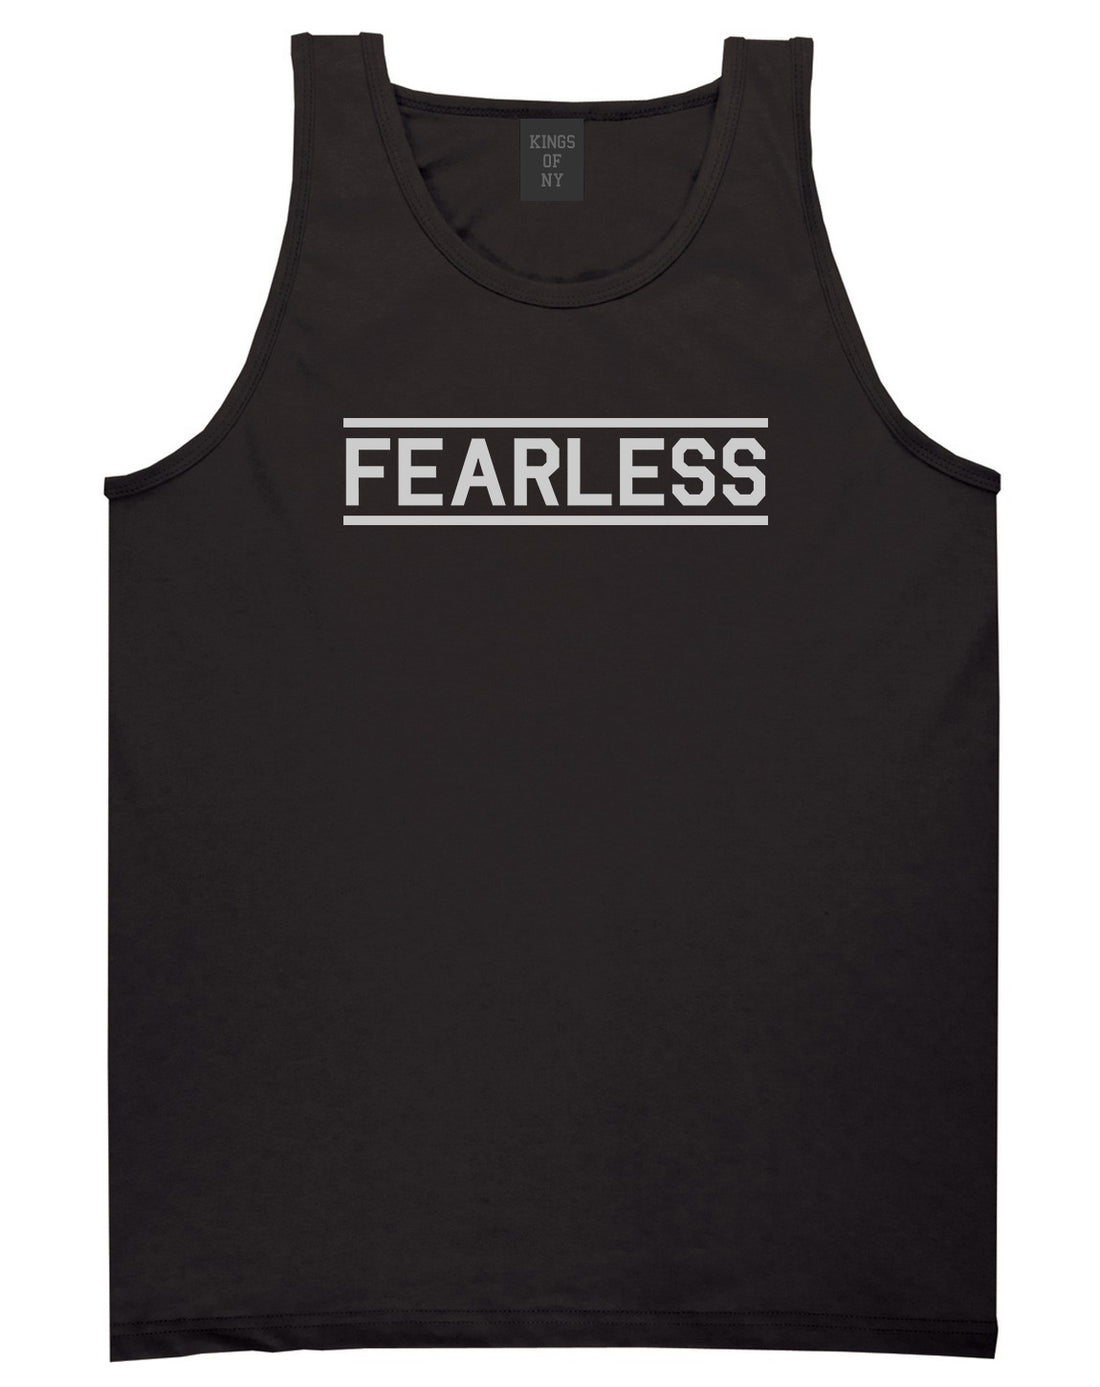 Fearless Gym Mens Black Tank Top Shirt by KINGS OF NY